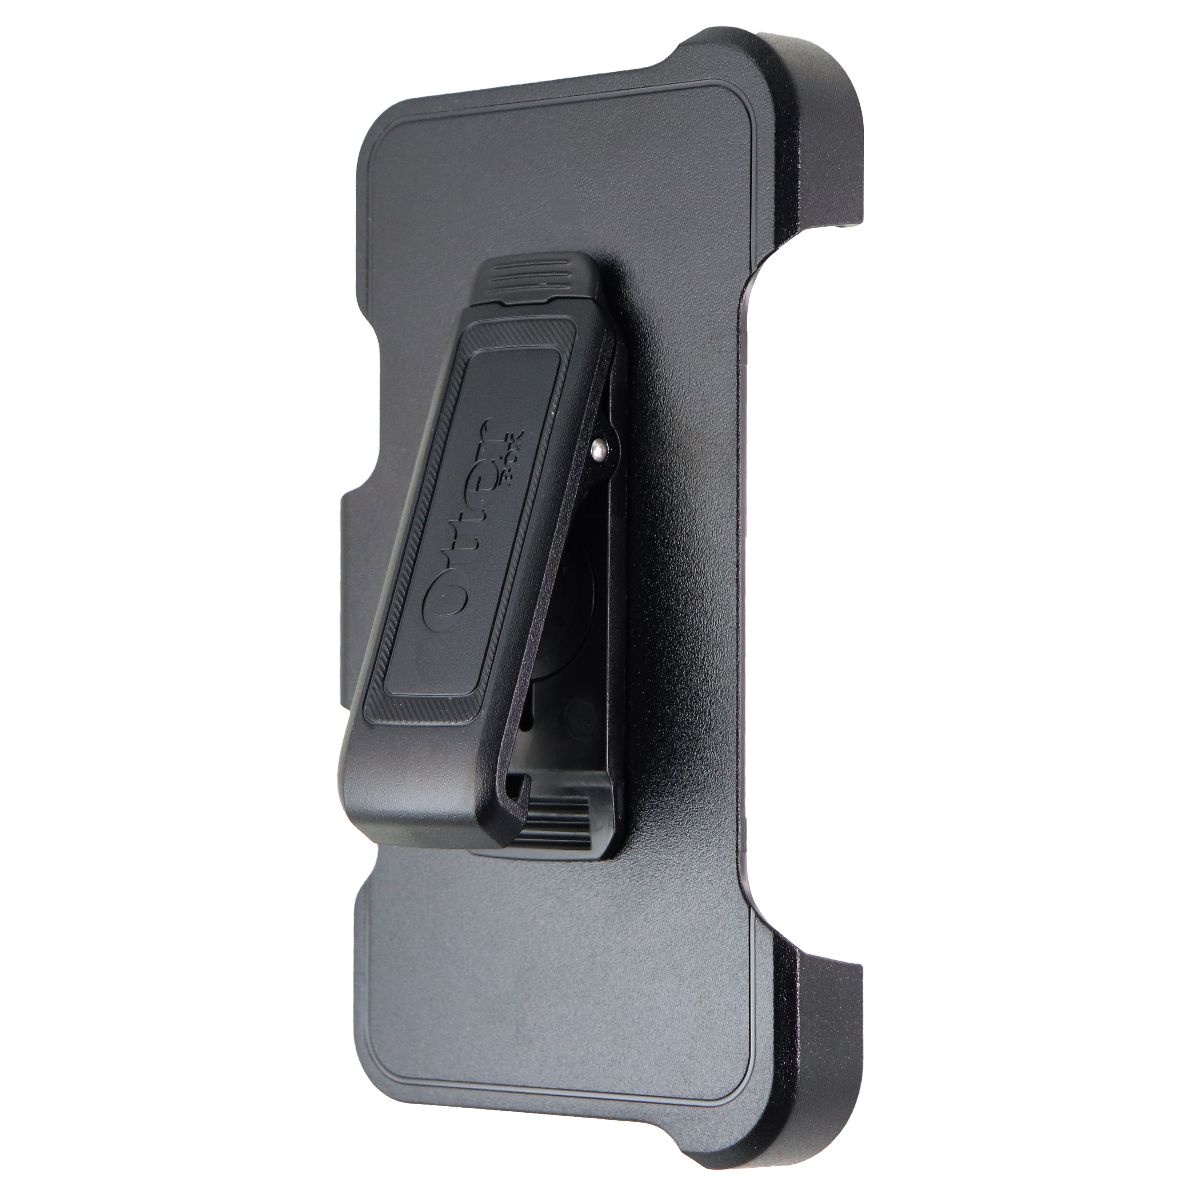 Pre-Owned OtterBox Replacement Holster Clip for iPhone SE (2nd Gen) & 8/7 Defender Cases - image 1 of 3